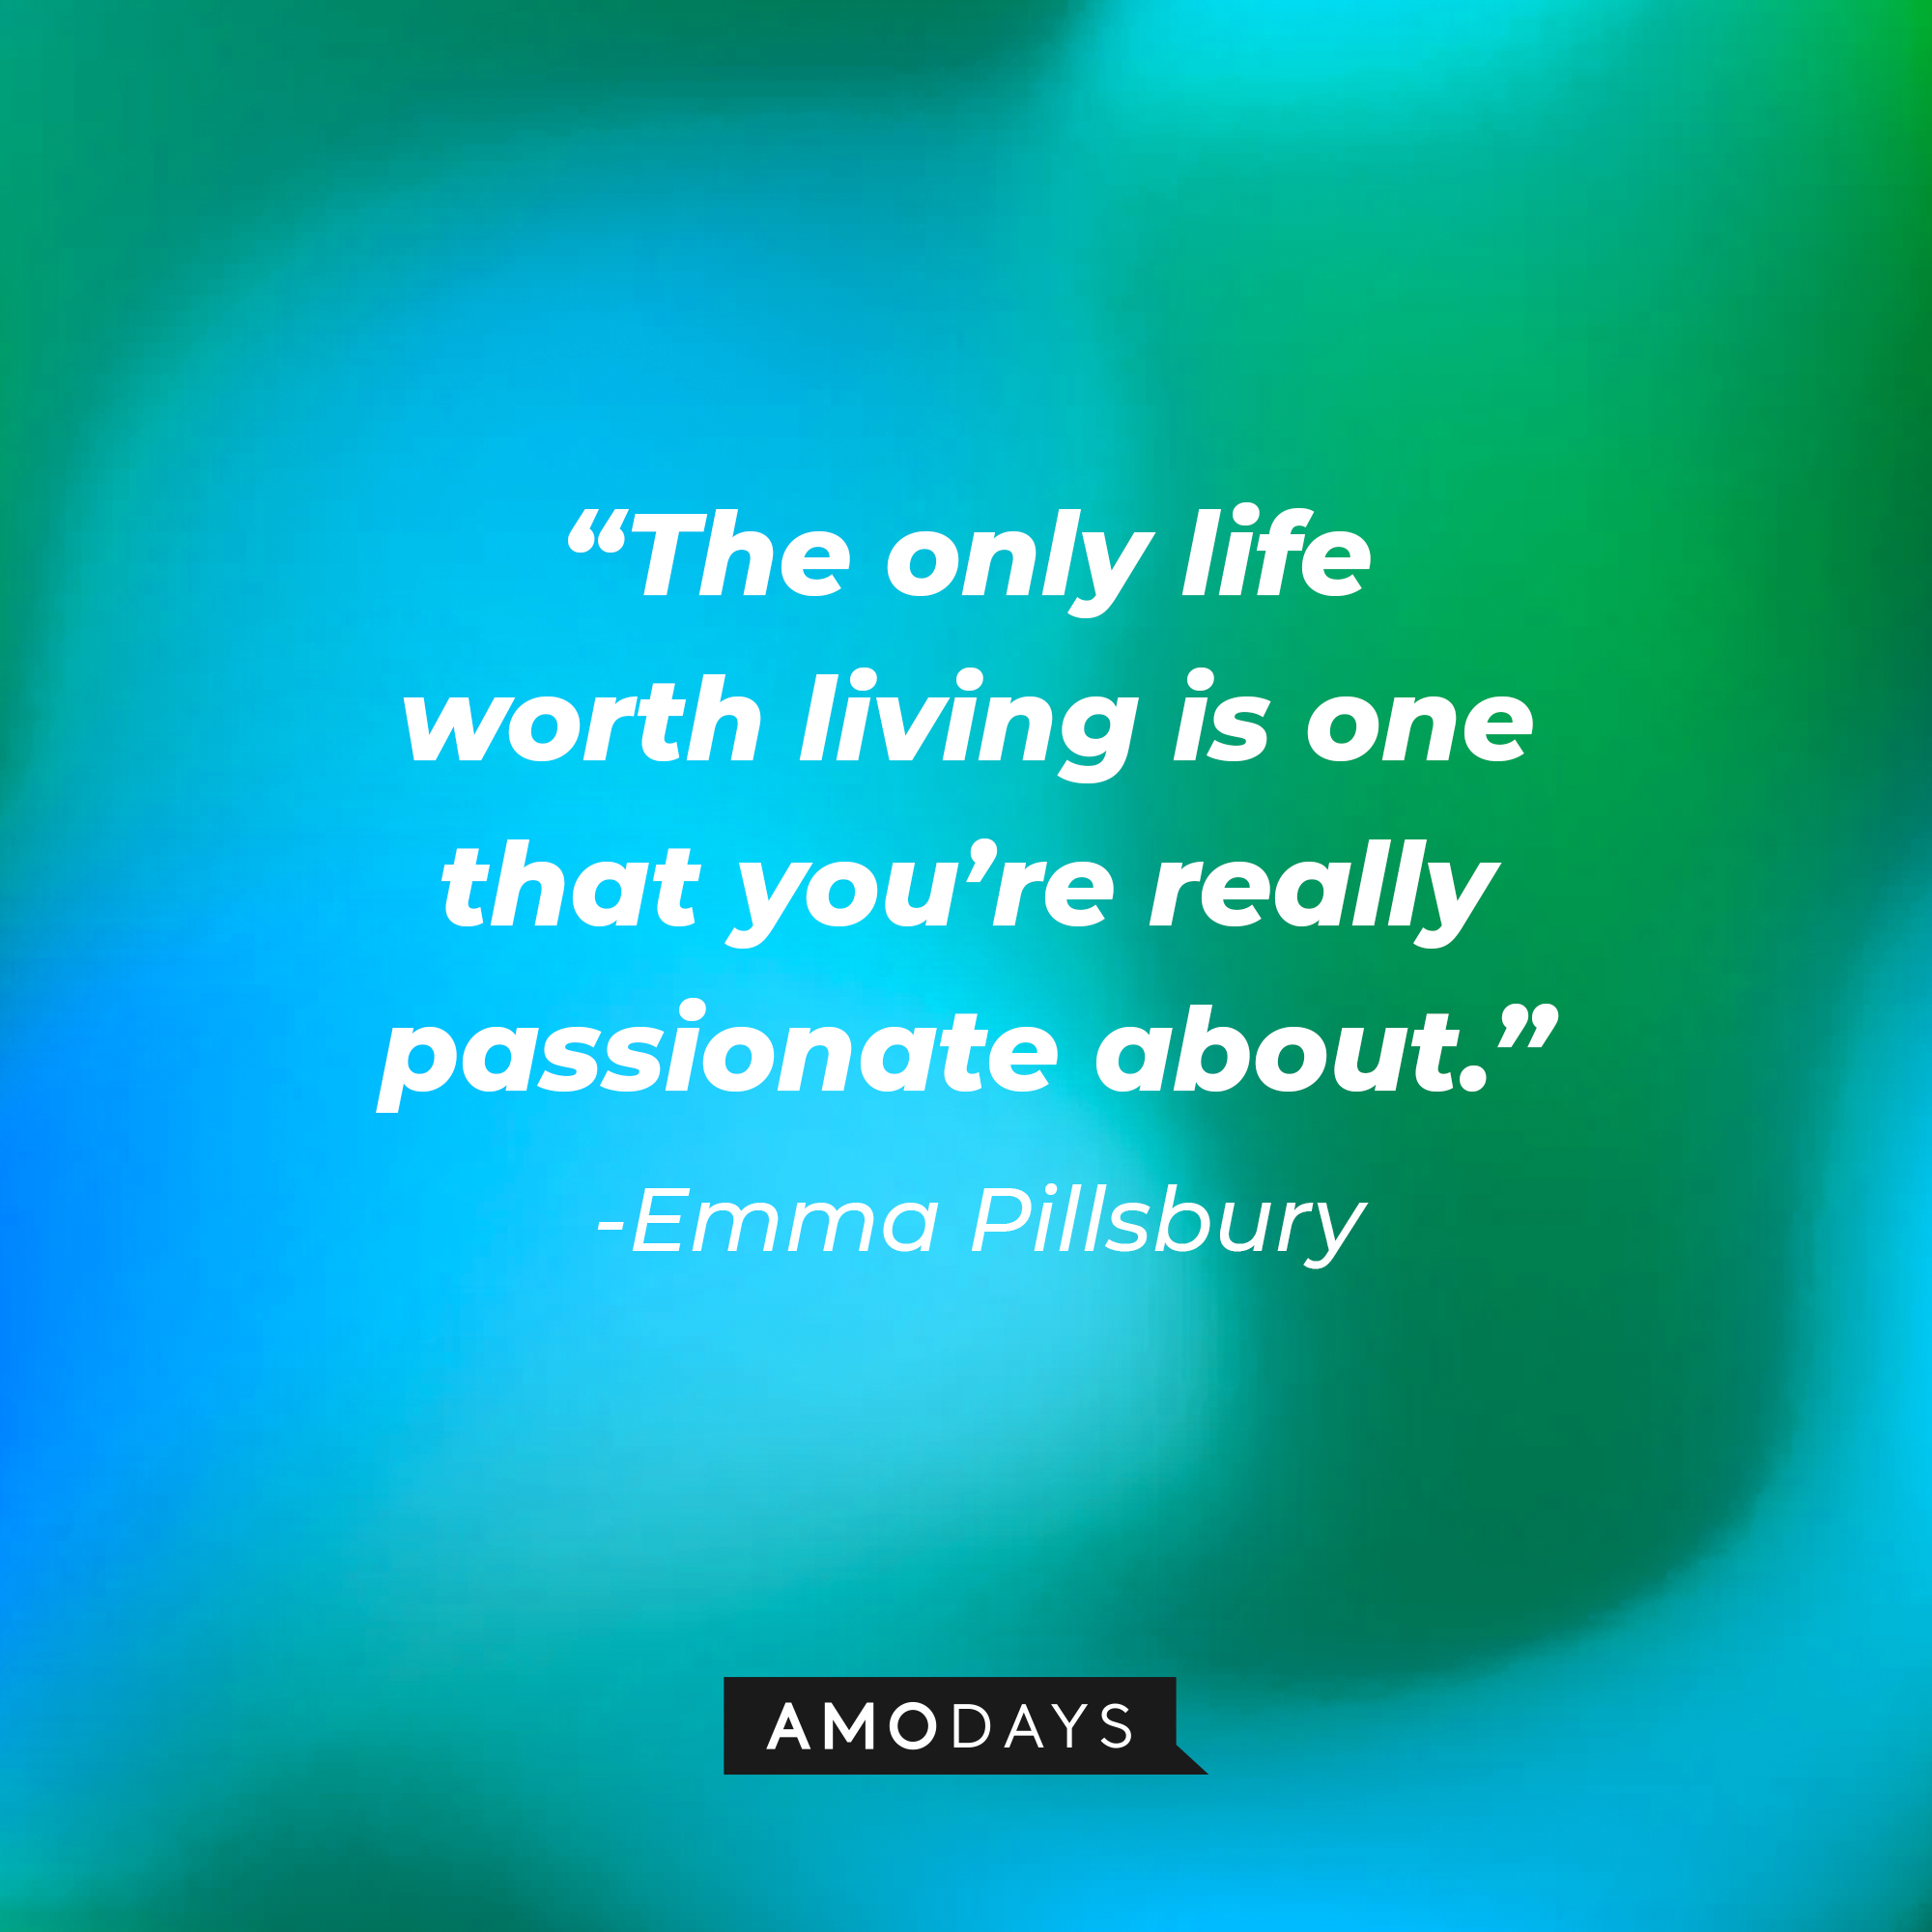 Emma Pillsbury’s quote from “Glee”: "The only life worth living is one that you’re really passionate about.” | Image: AmoDays